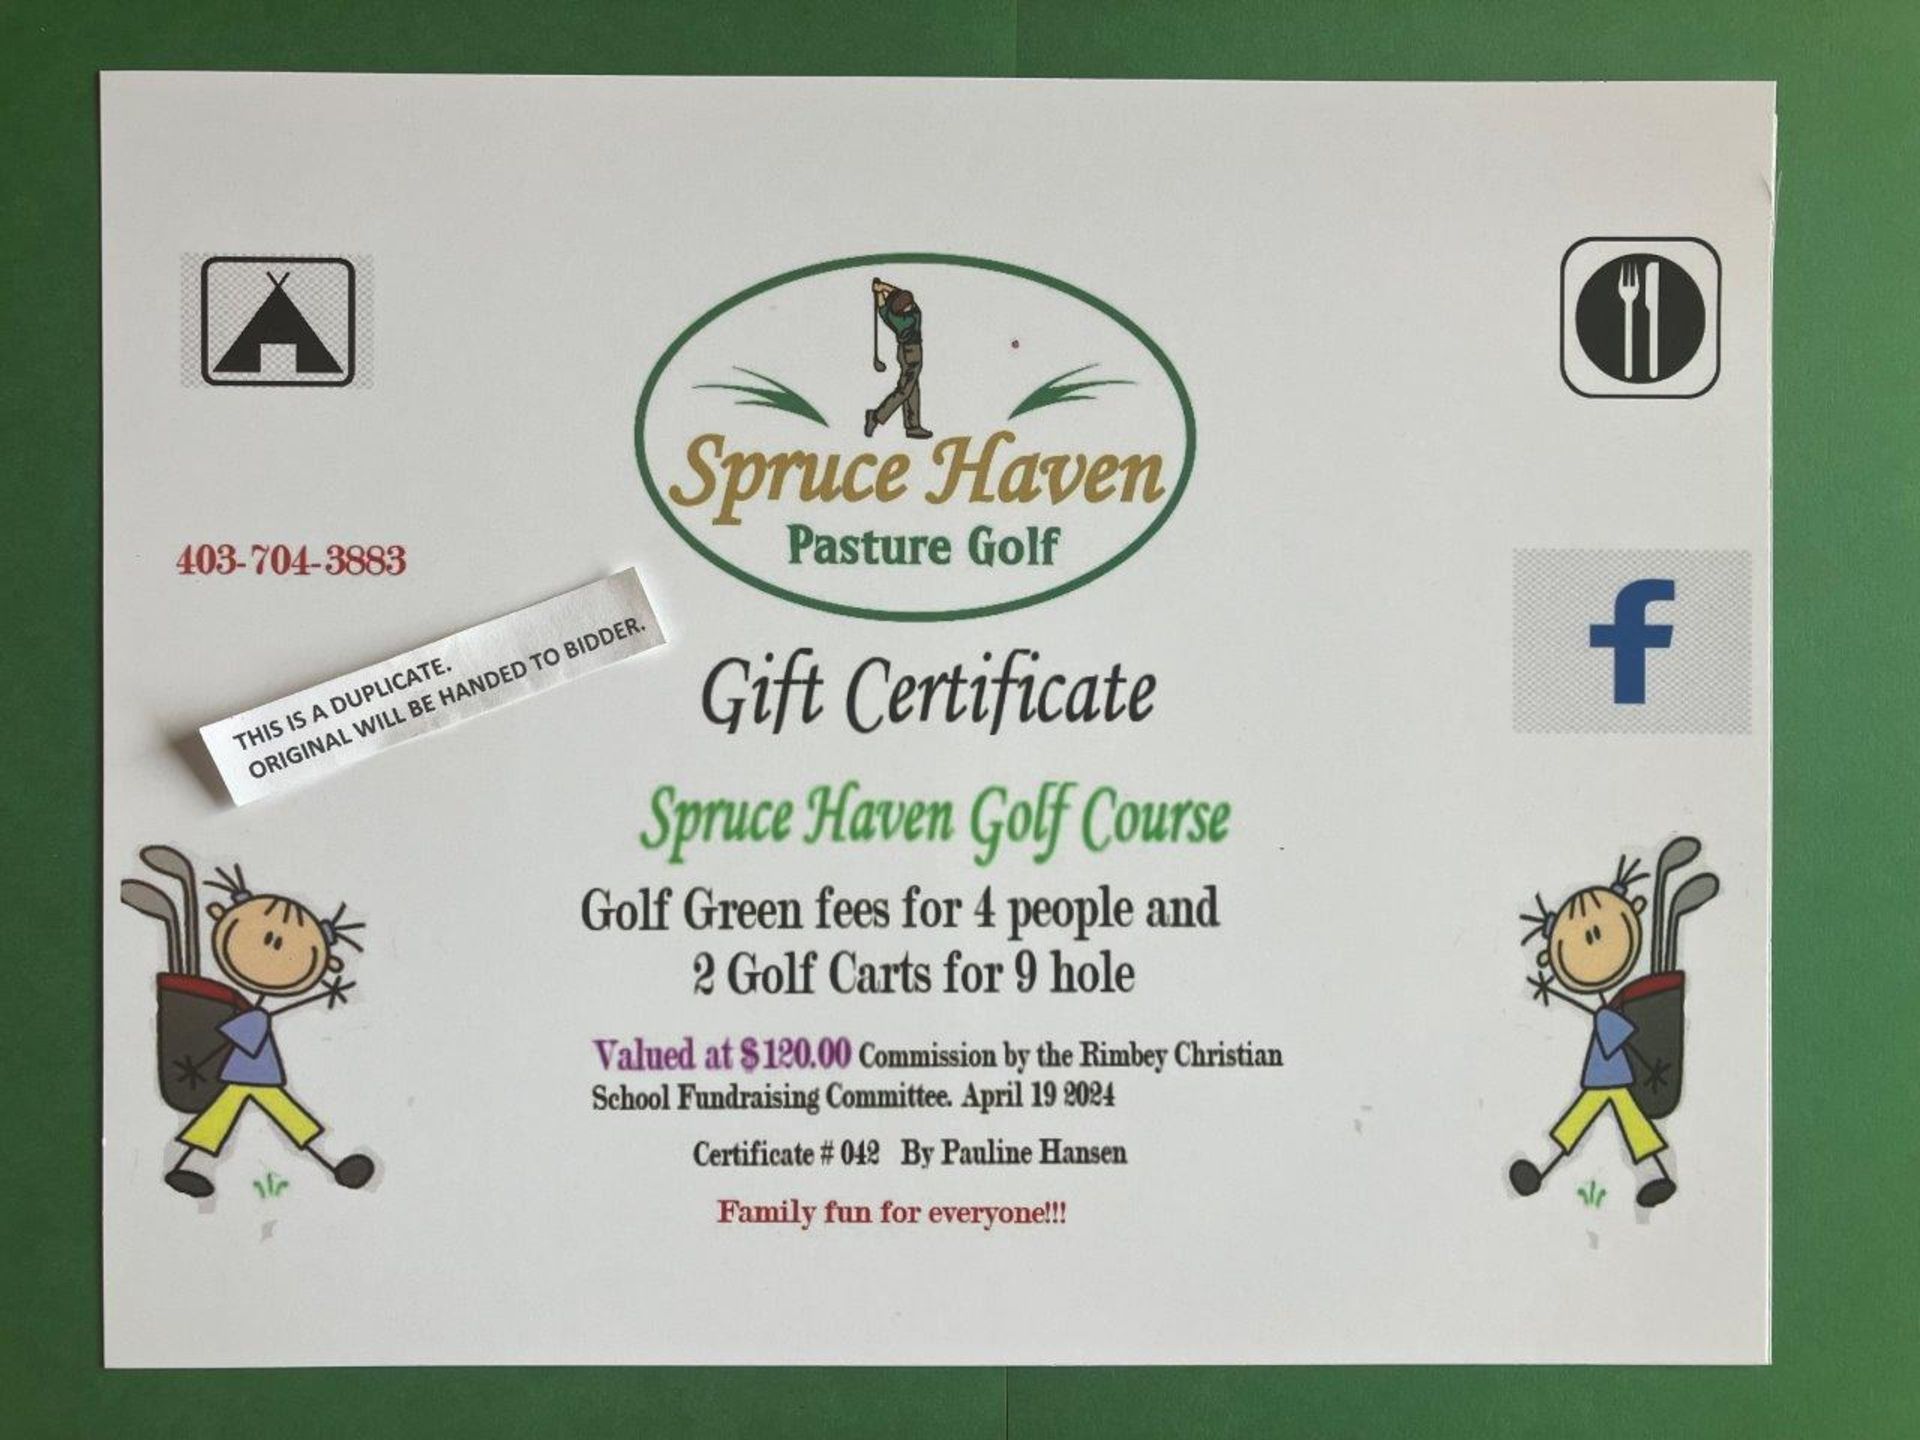 SPRUCE HAVEN PASTURE GOLF COURSE GIFT CERTIFICATE